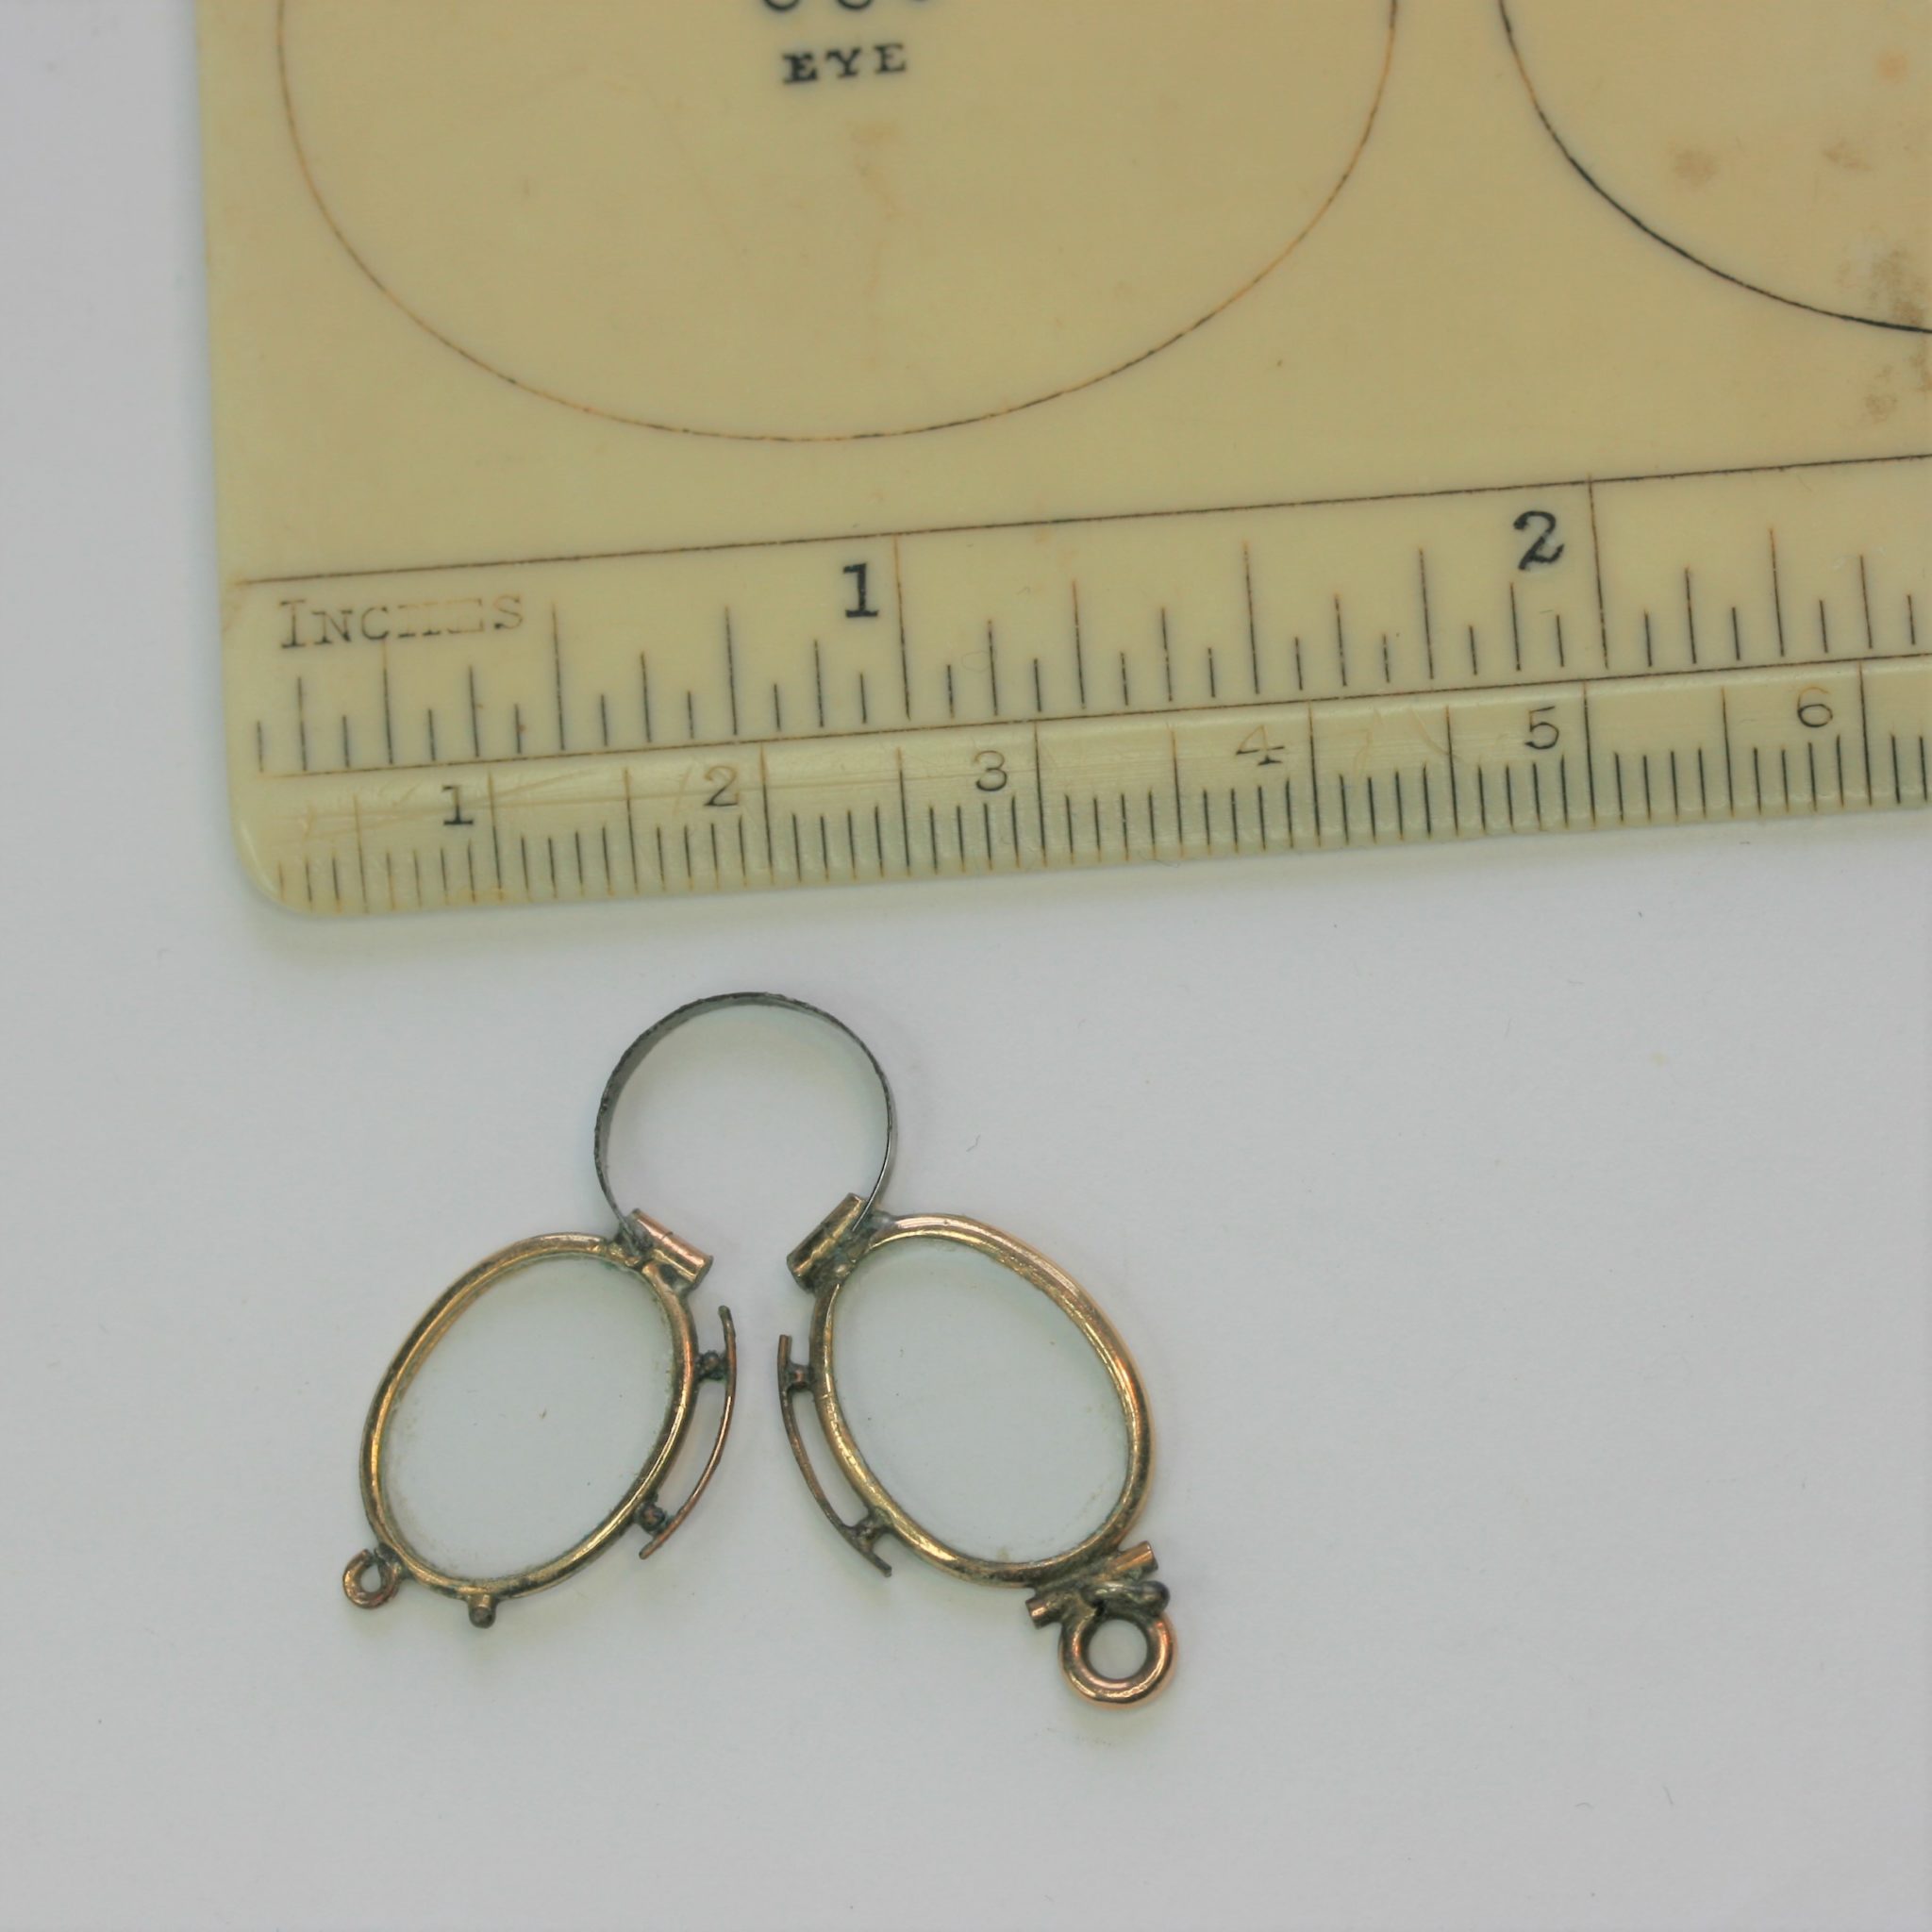 MINIATURE PINCE NEZ SPECTACLES , EXCELLENT CONDITION,  1 IN. WIDE !!